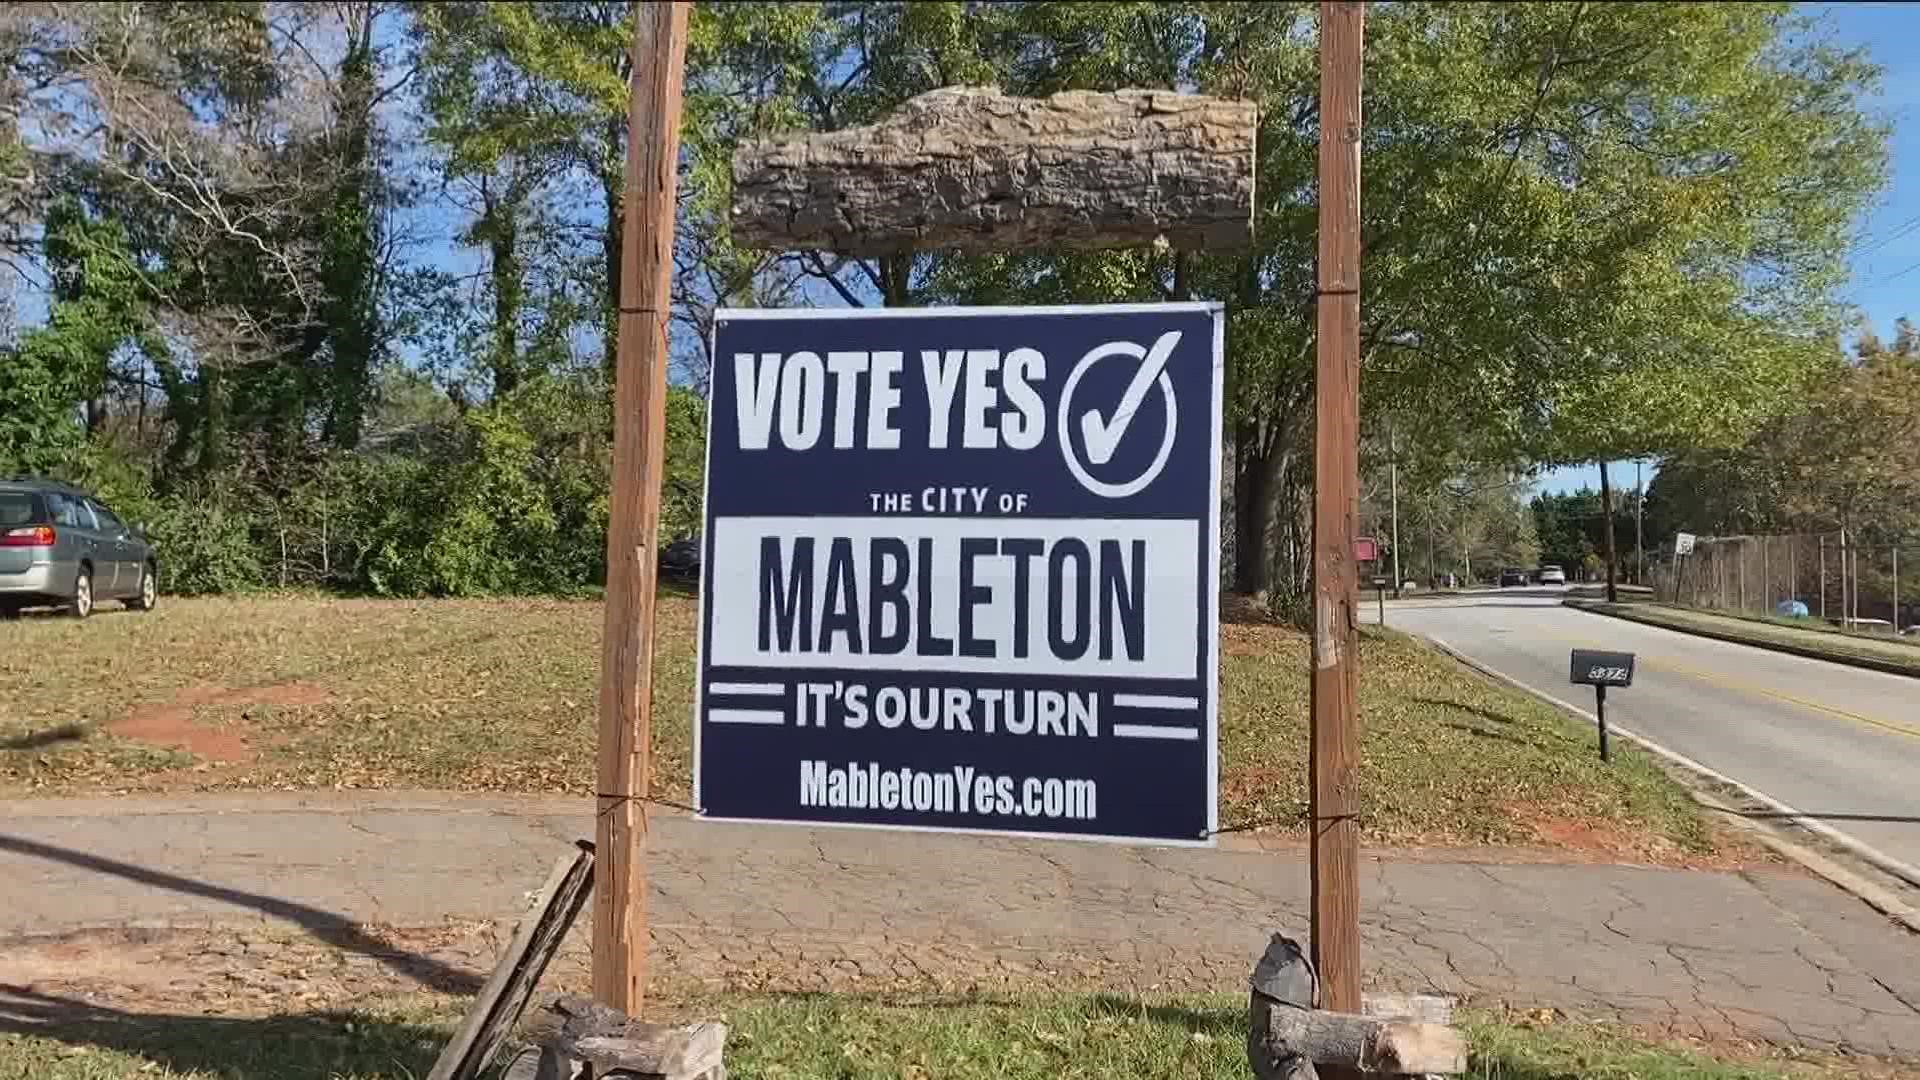 Mableton is going to become a city next year, voters decided.